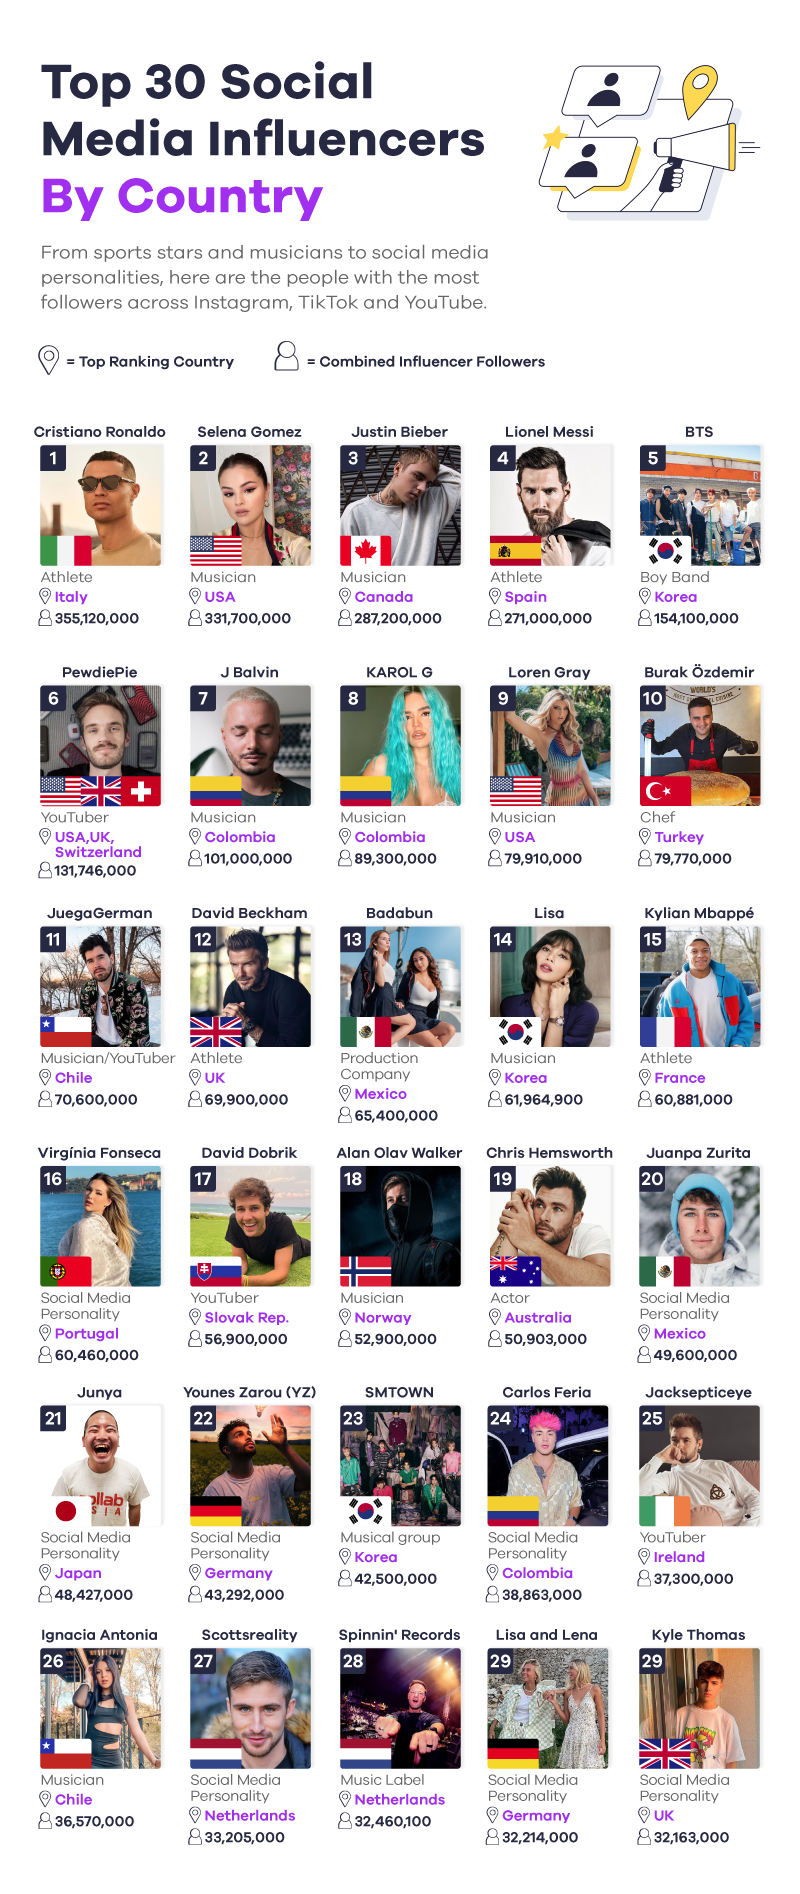 Ronaldo streets ahead of Instagram influencers in annual ranking